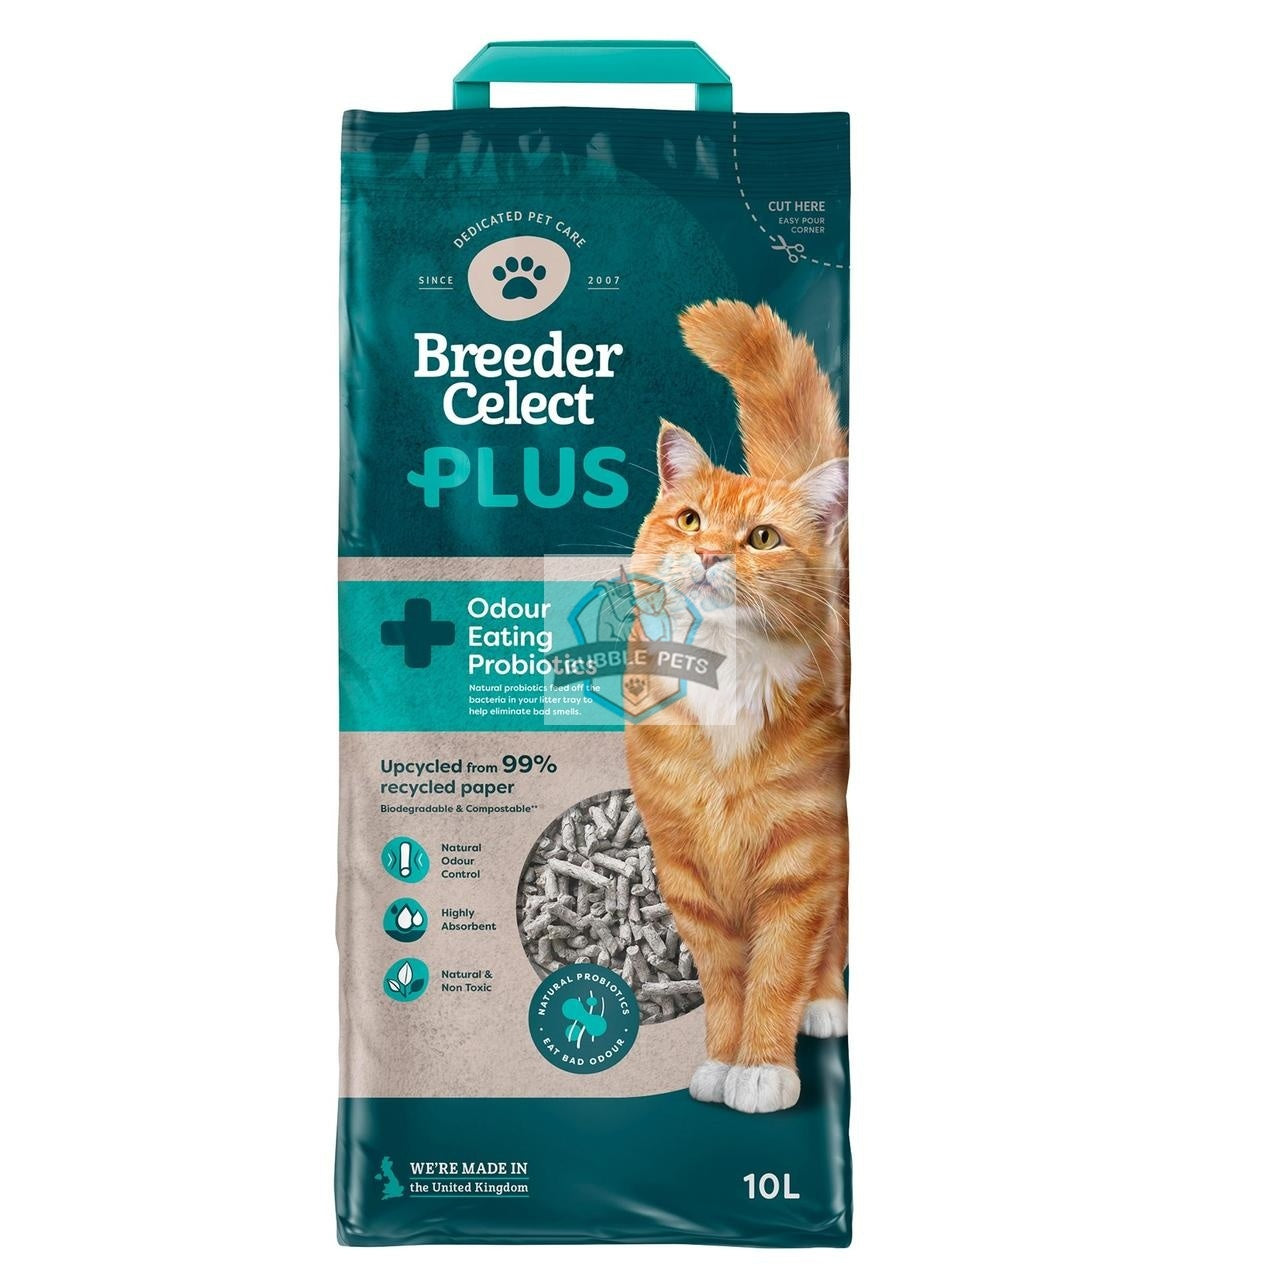 BreederCelect Plus Probiotic Recycled Paper Cat Litter